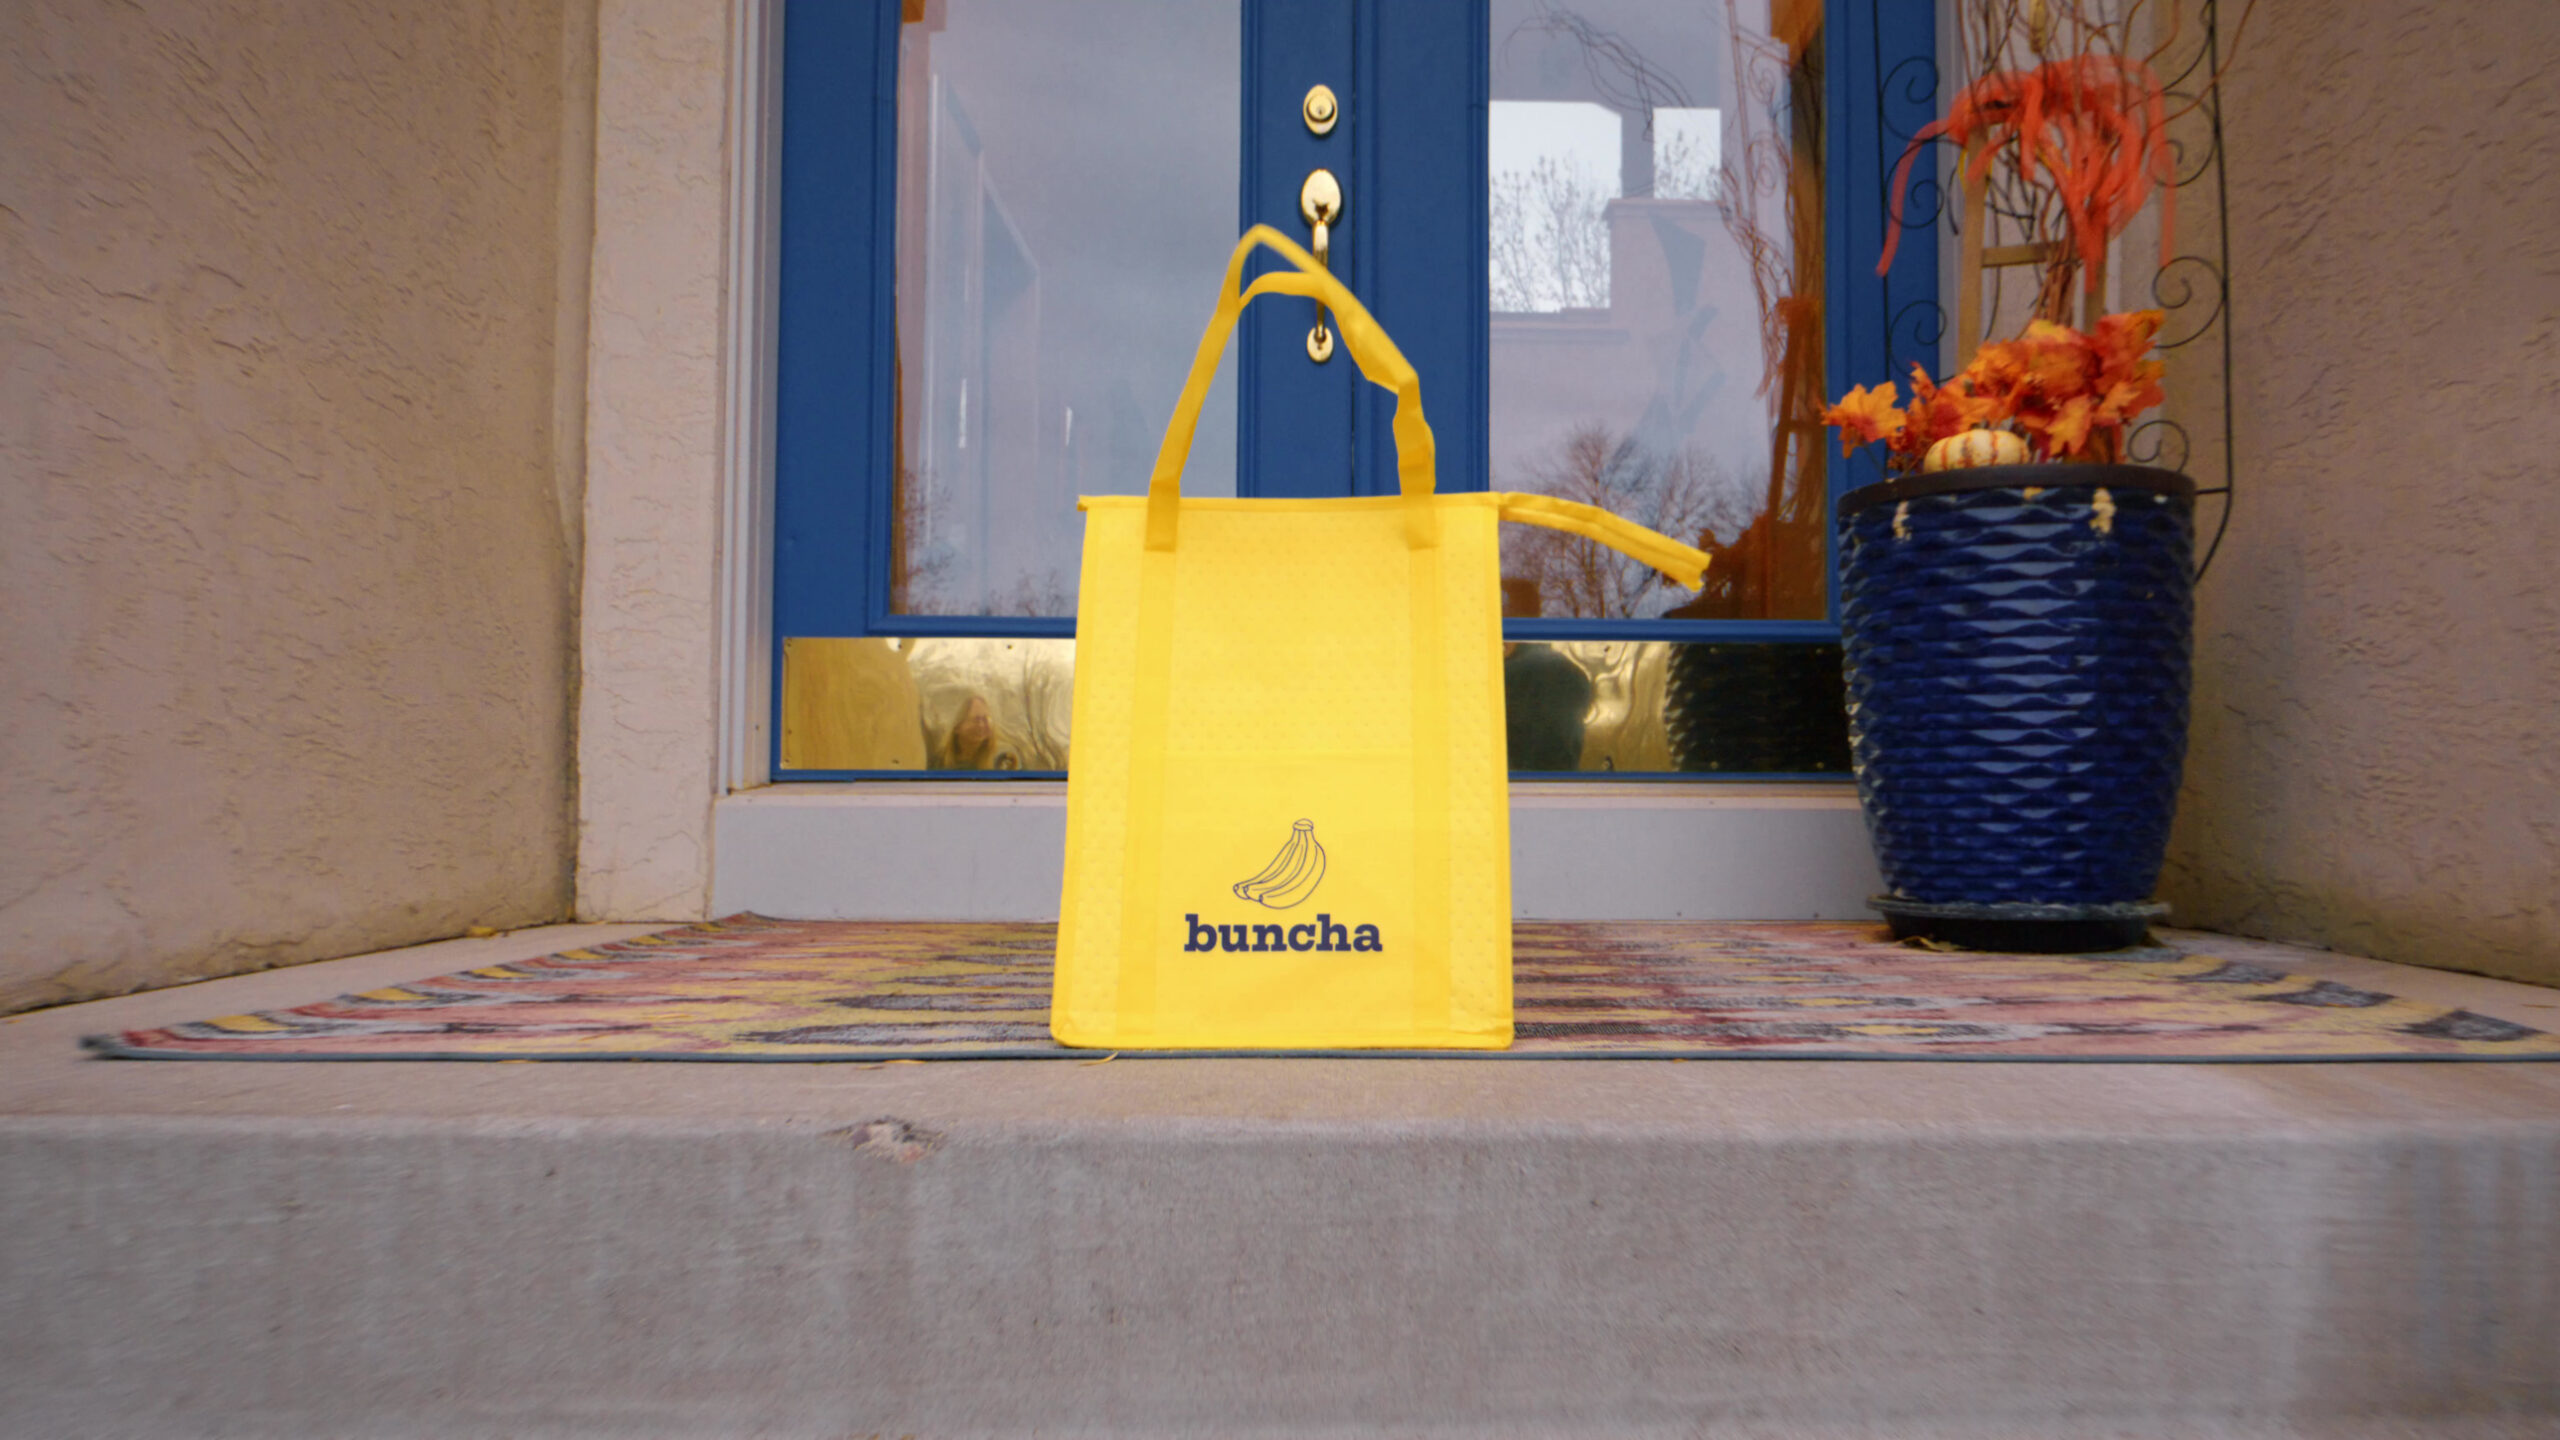 Introducing Buncha: Grocery Delivery for $1.45 4-1-23